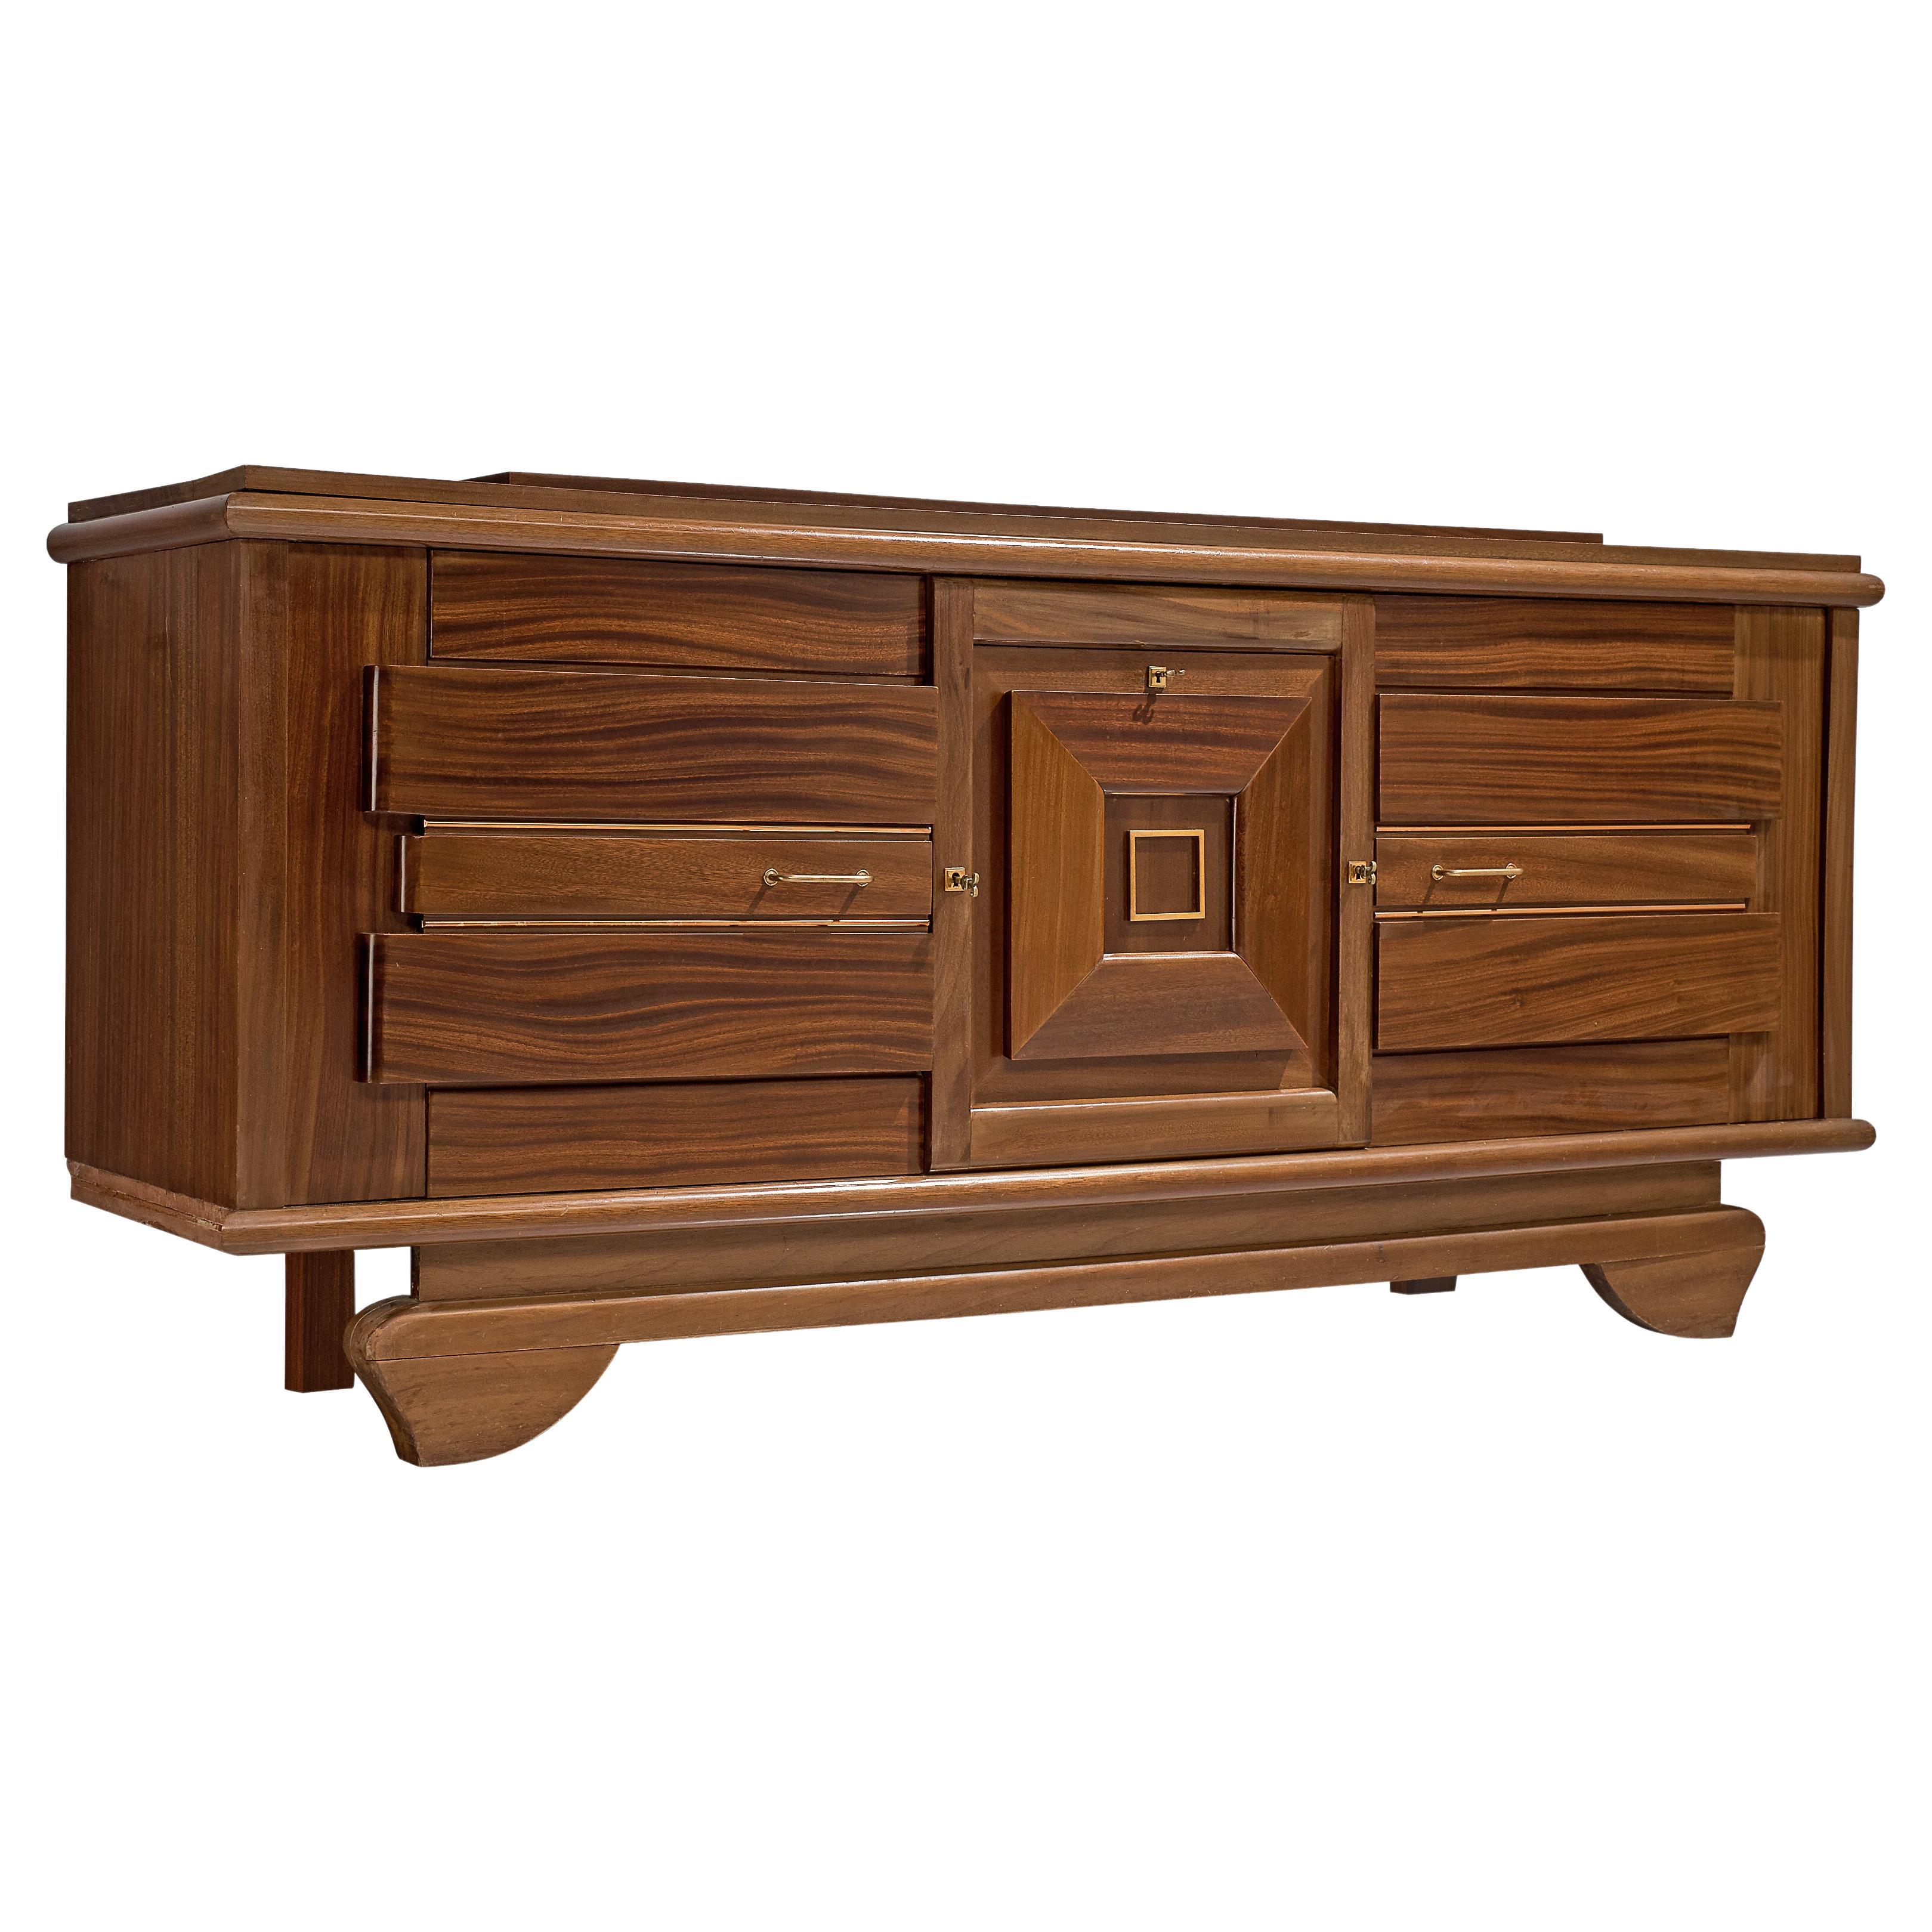 French Art Deco Sideboard in Mahogany and Brass